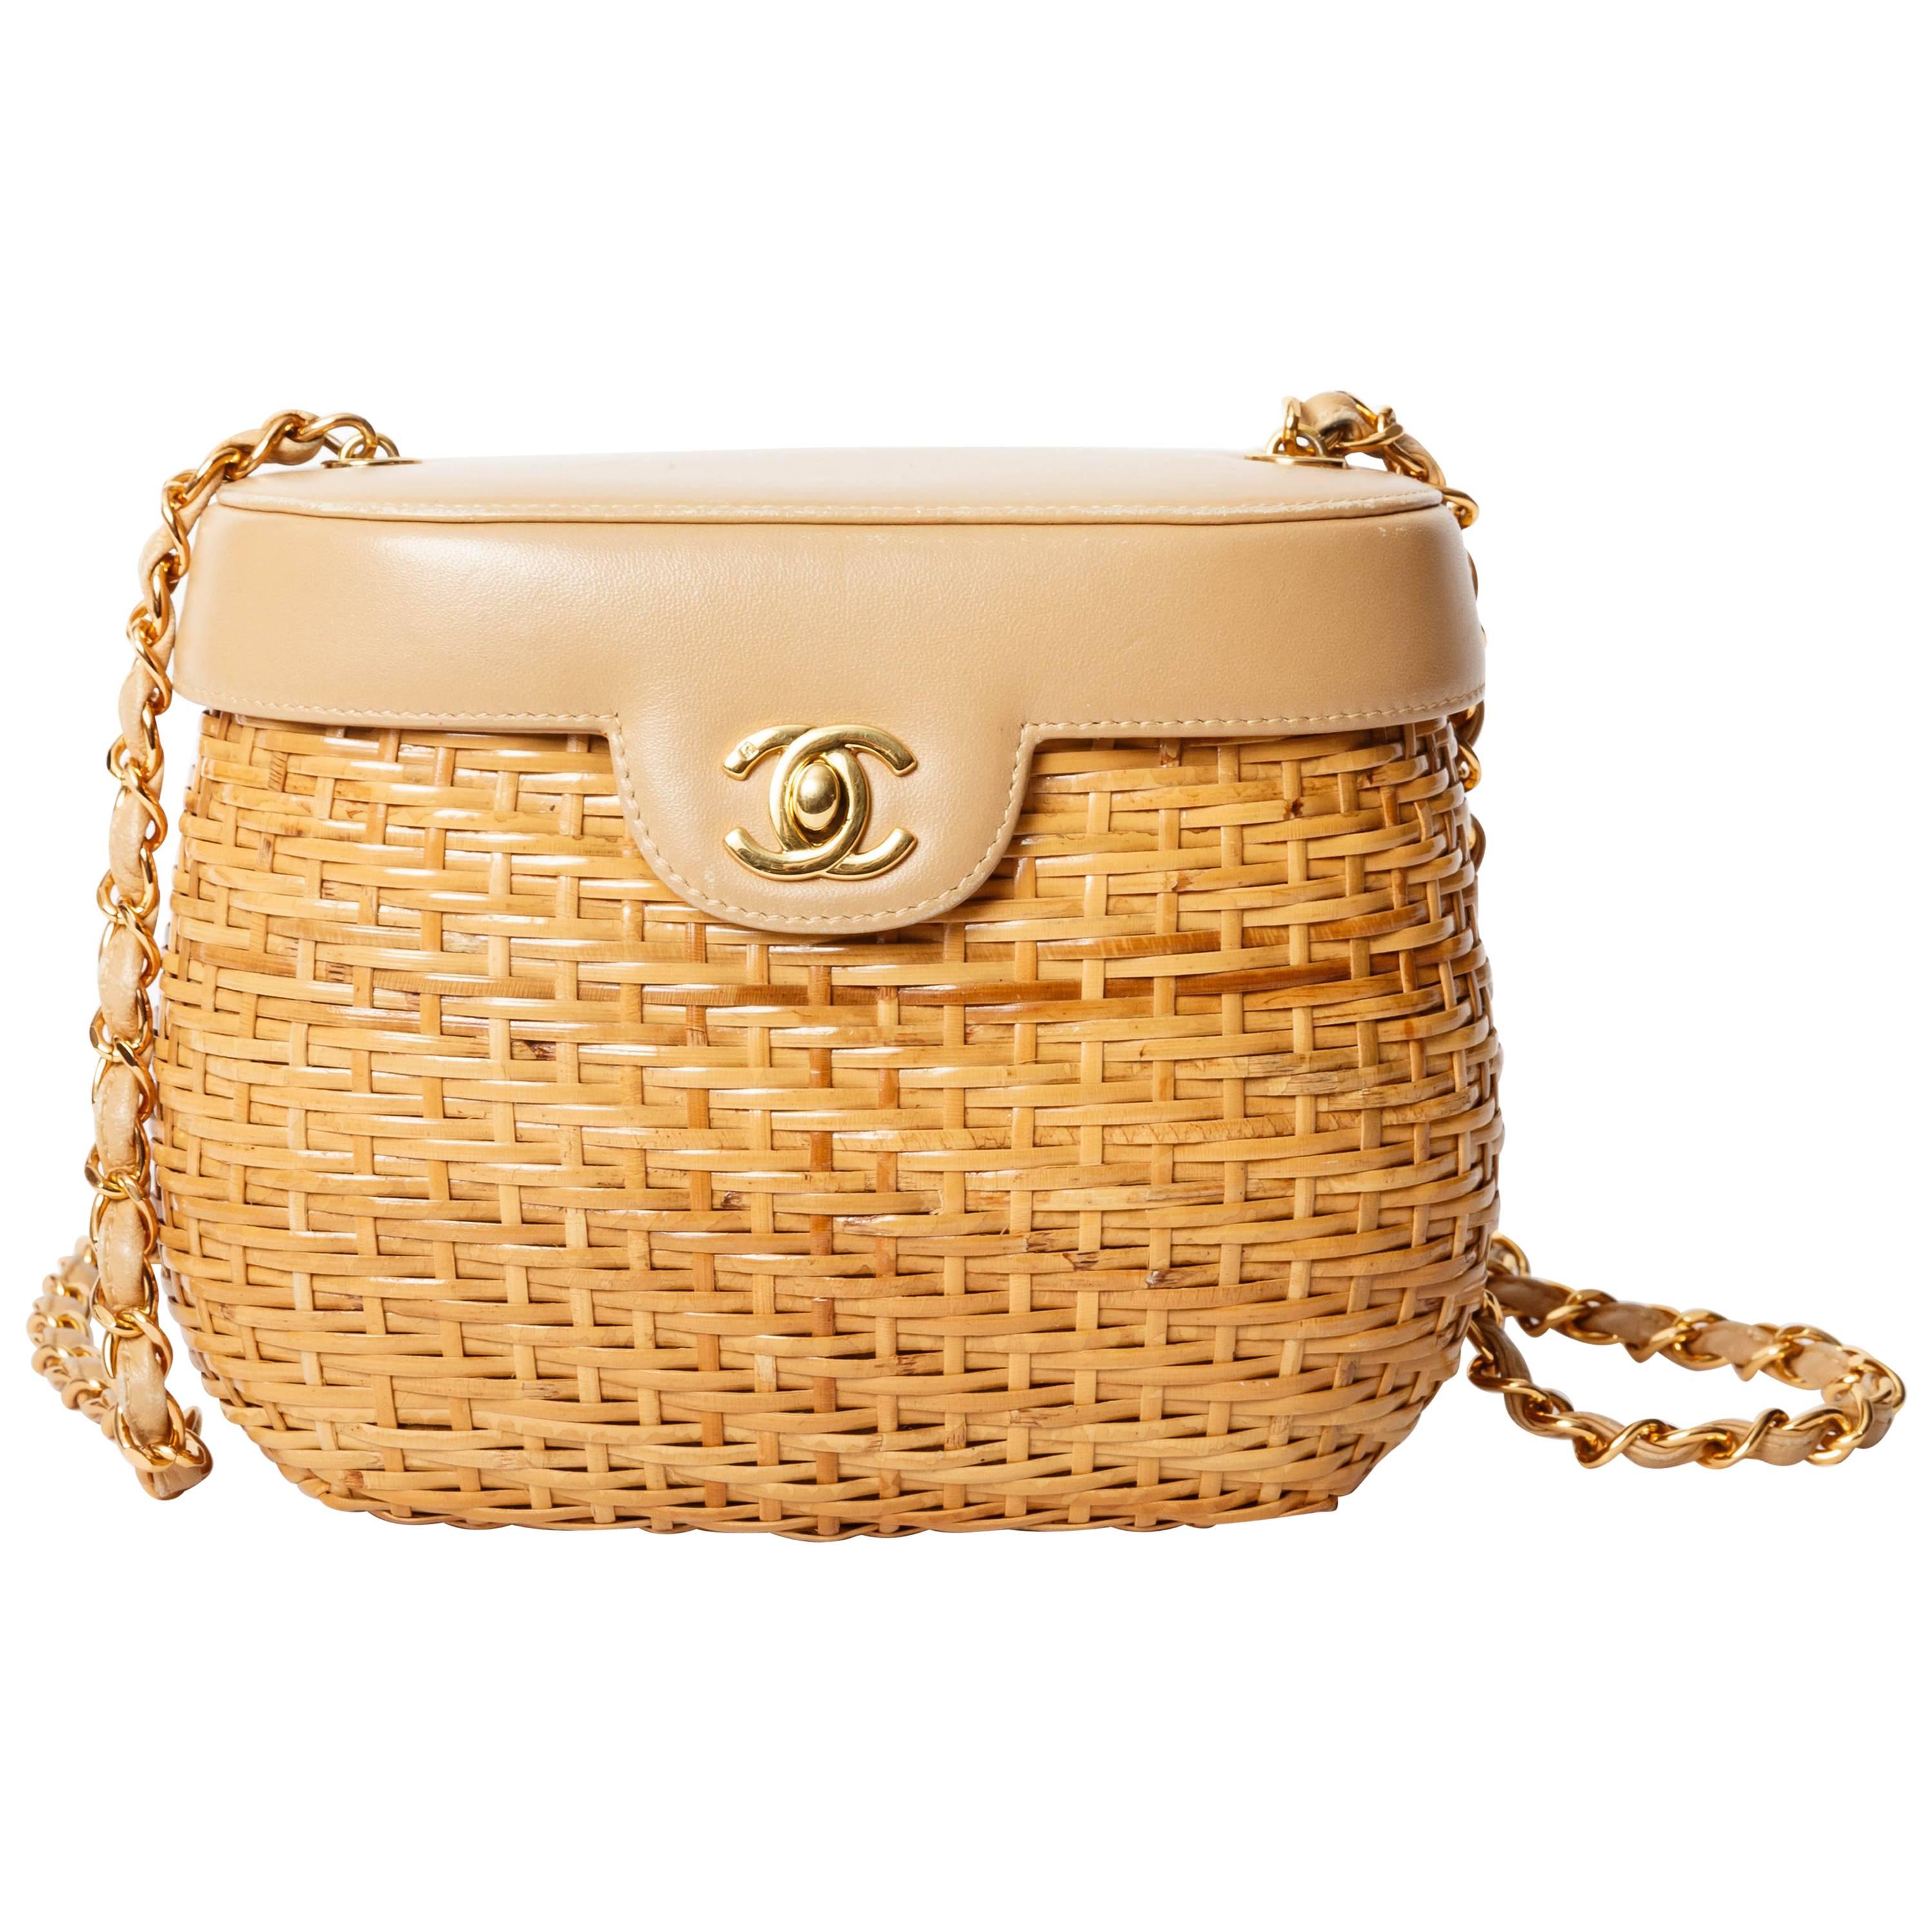 Chanel Vintage Lambskin and Straw Shoulder Bag with Gold Hardware 